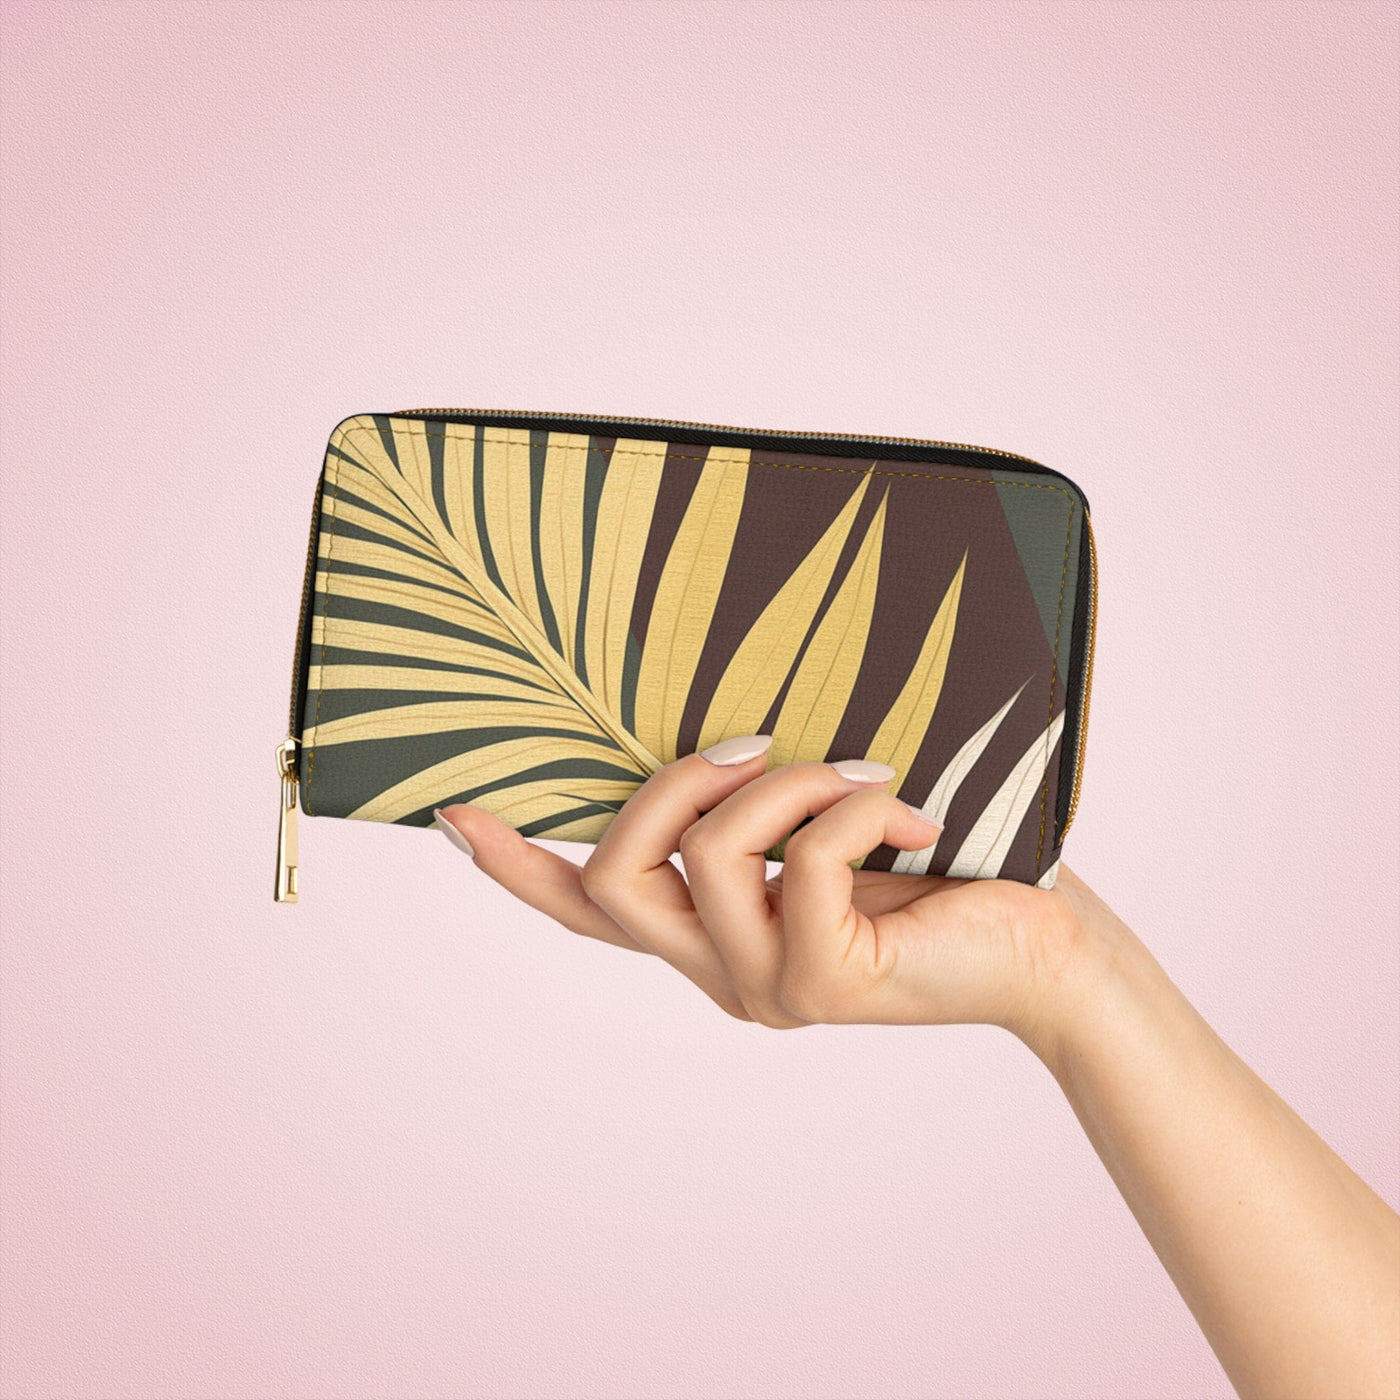 Palm Tree Leaves Yellow And Green Illustration Womens Zipper Wallet Clutch